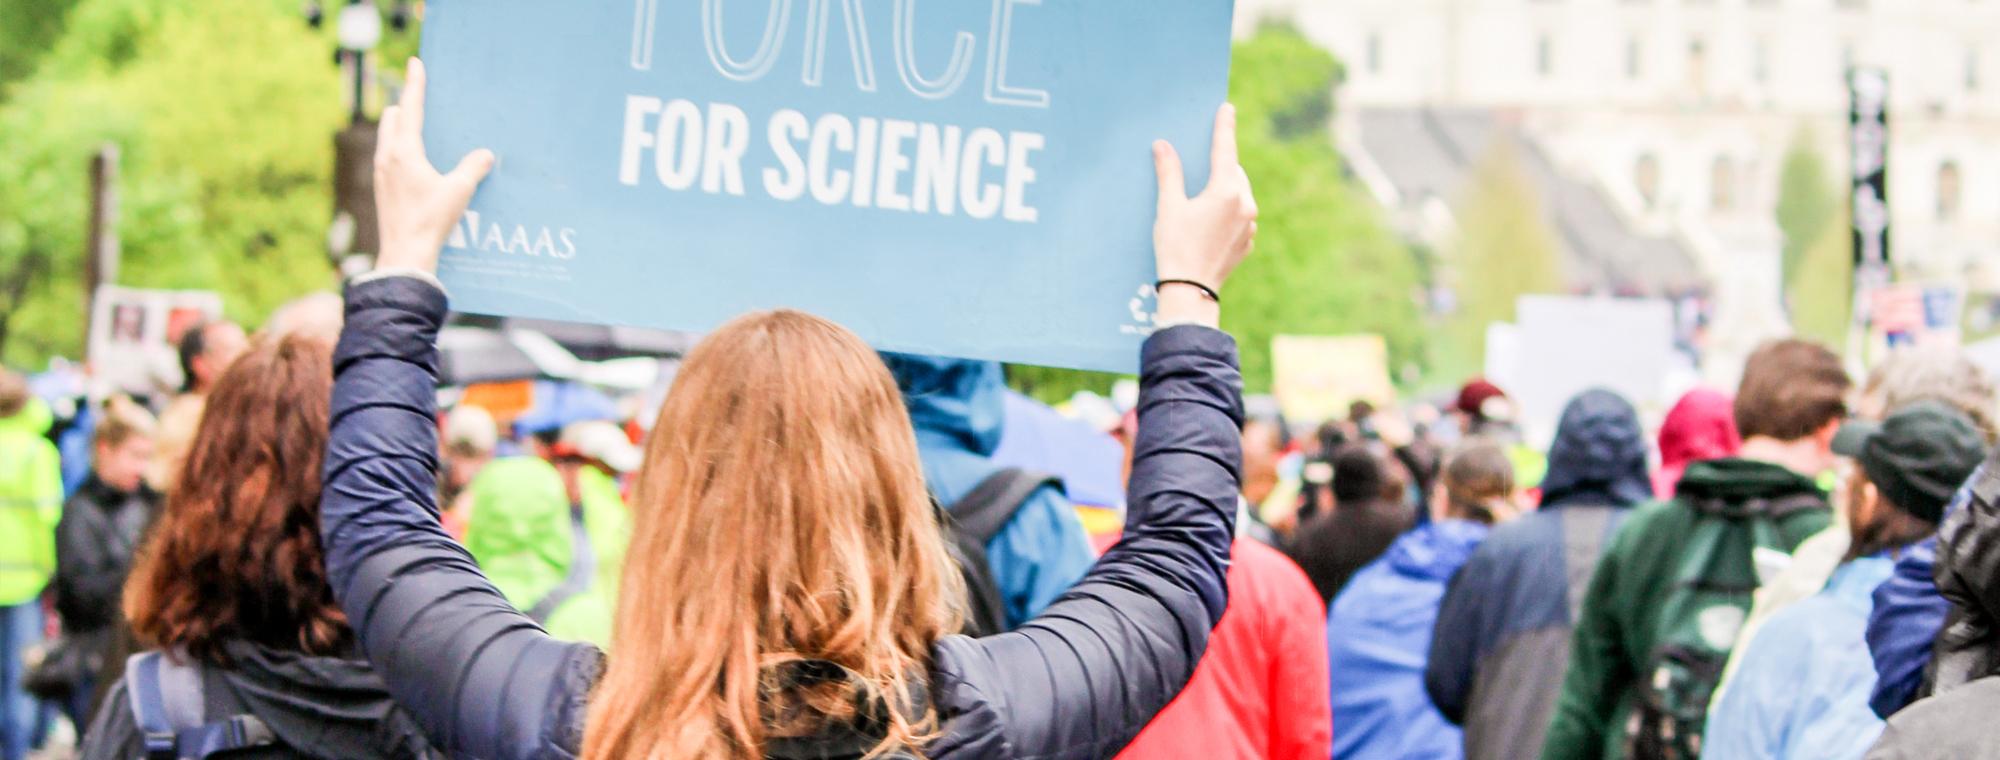 March For Science (c) Joe Flood_(Flicker_cc-by-nc-nd 2.0)